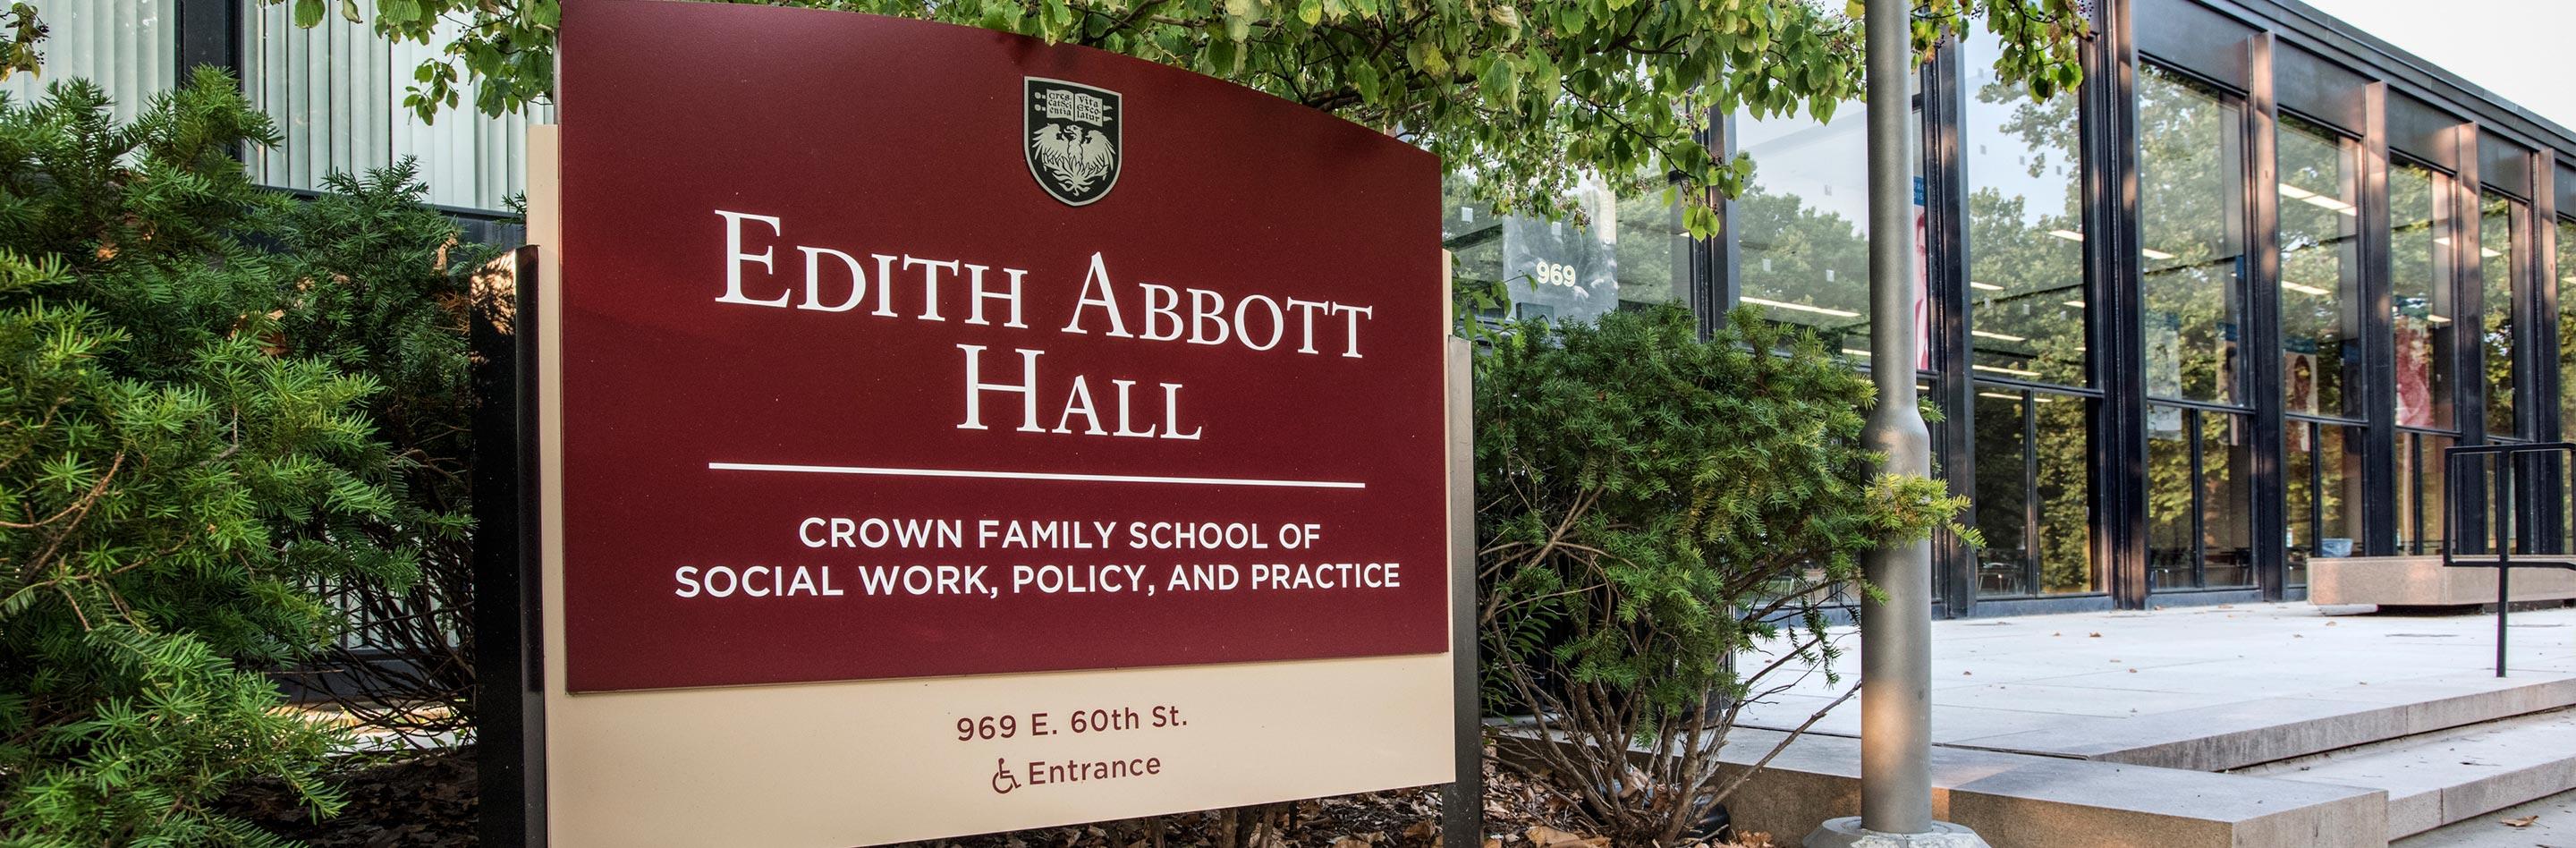 Front exterior view of Edith Abbott Hall from an angle. The maroon building sign for Edith Abbott Hall fills up the left side of the frame.